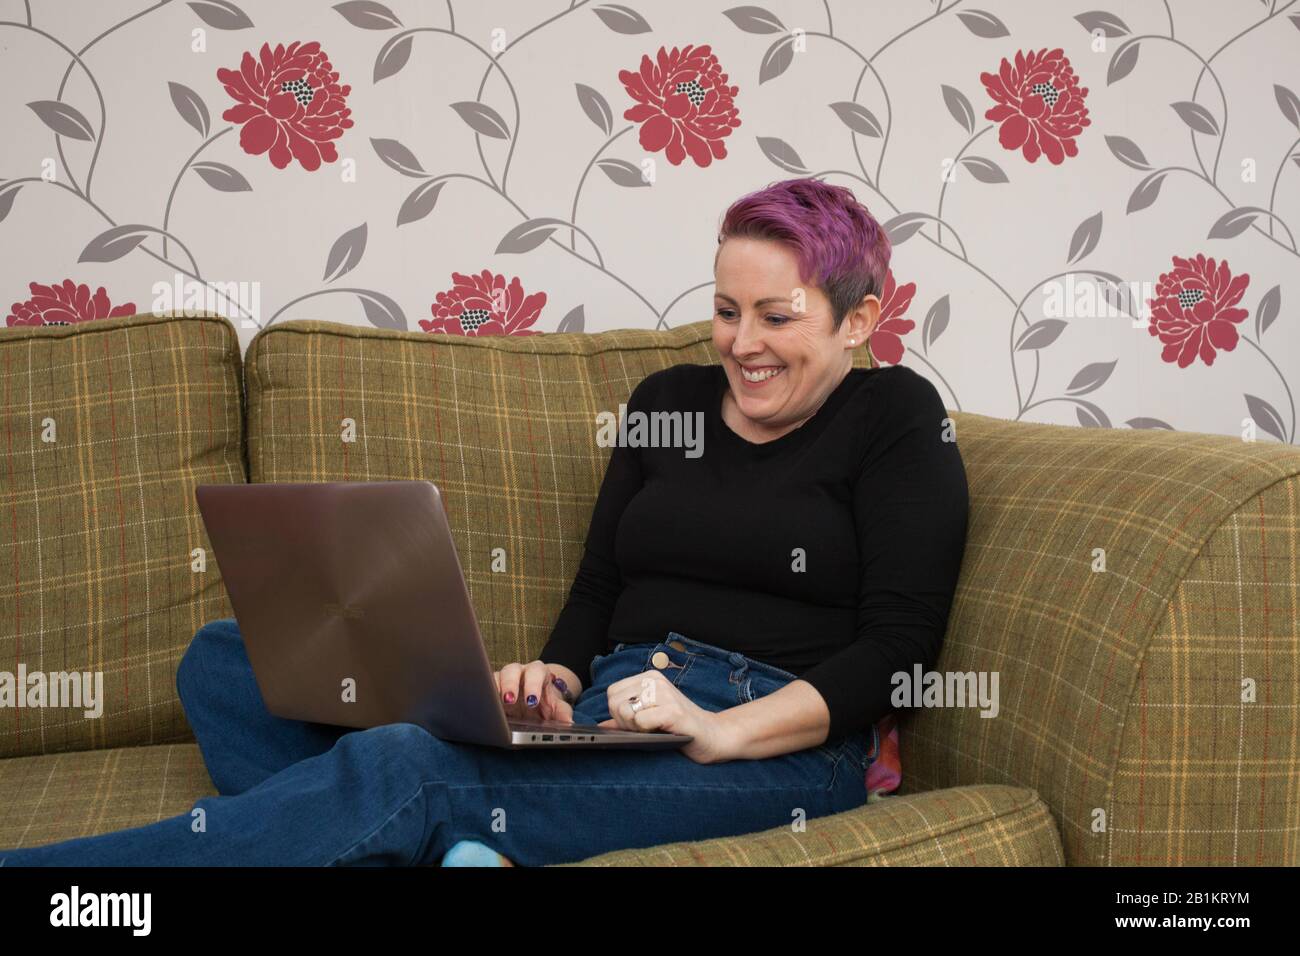 A woman sat on her sofa on her laptop computer looking excited Stock Photo